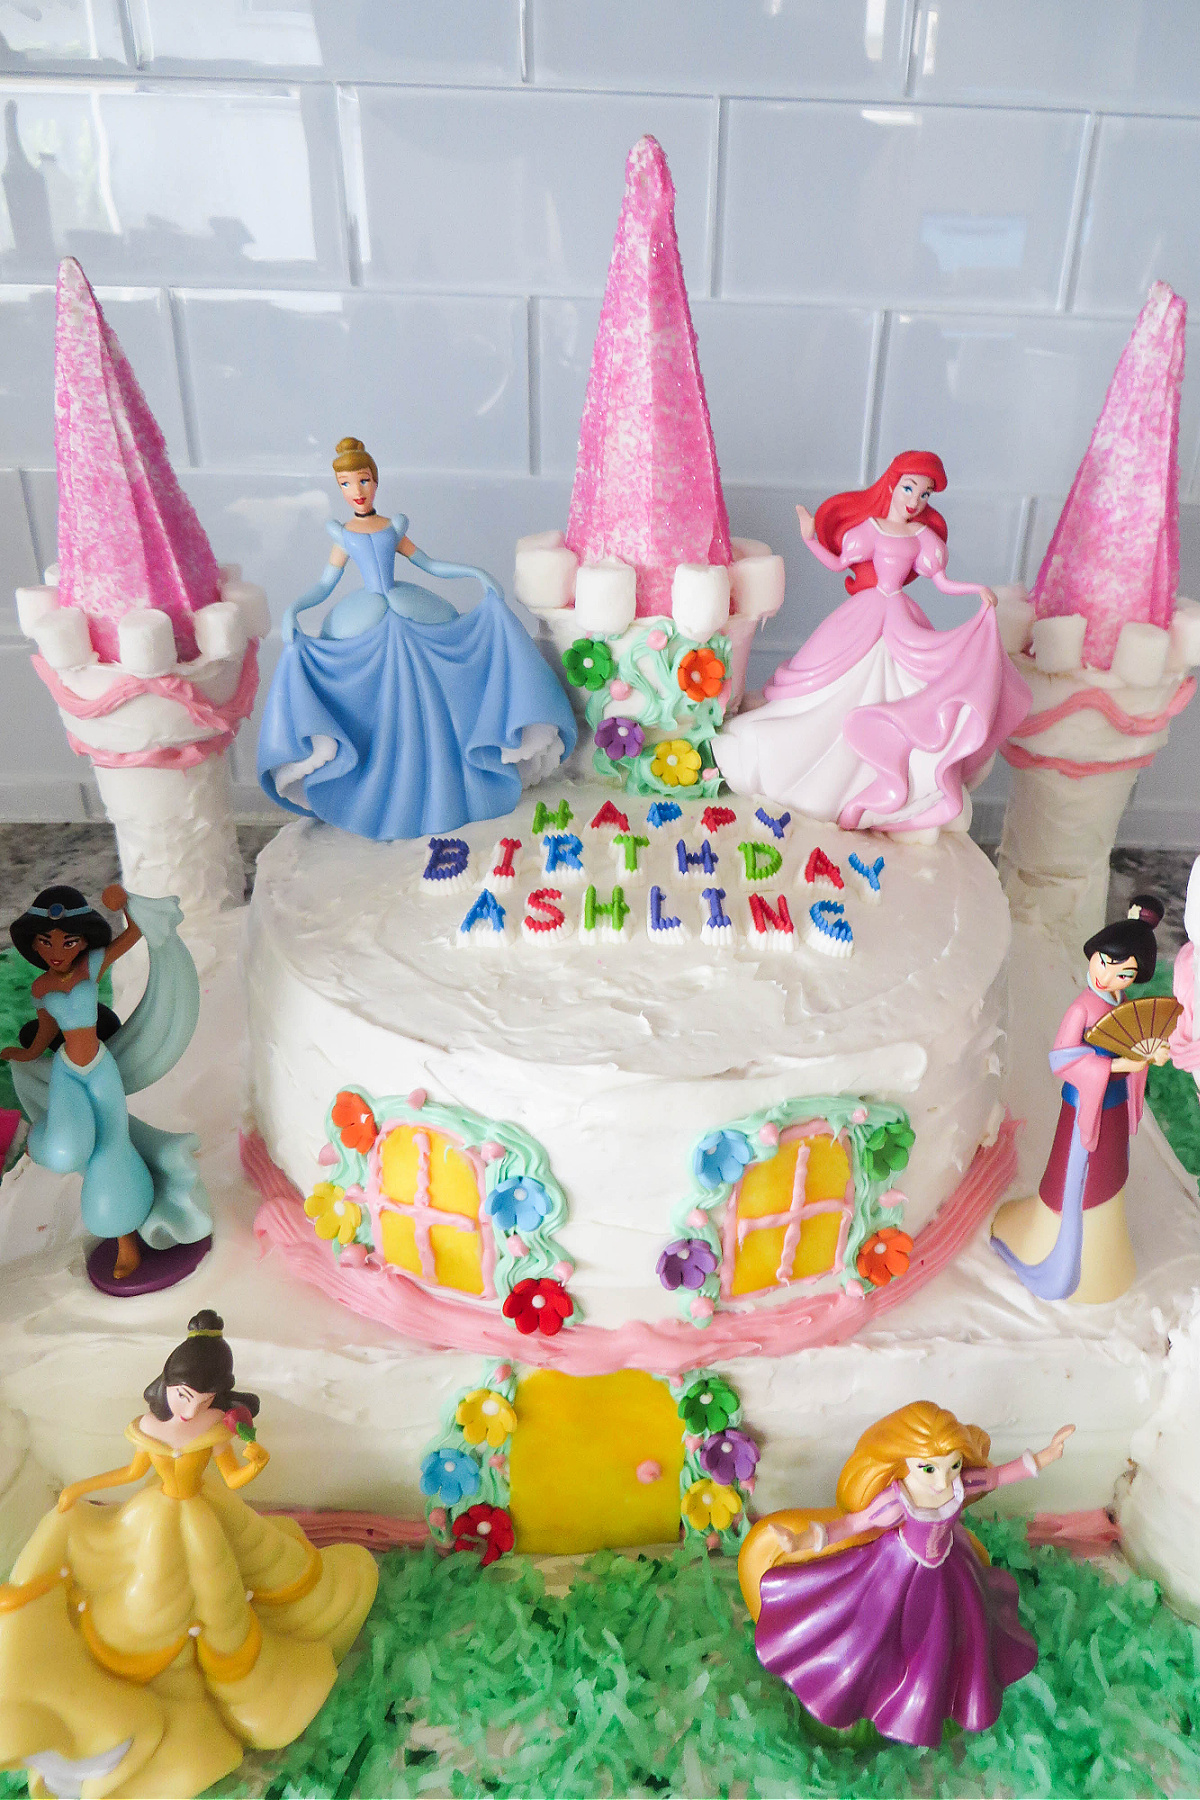 A colorful princess-themed birthday cake with figurines of disney princesses and pink castle turrets